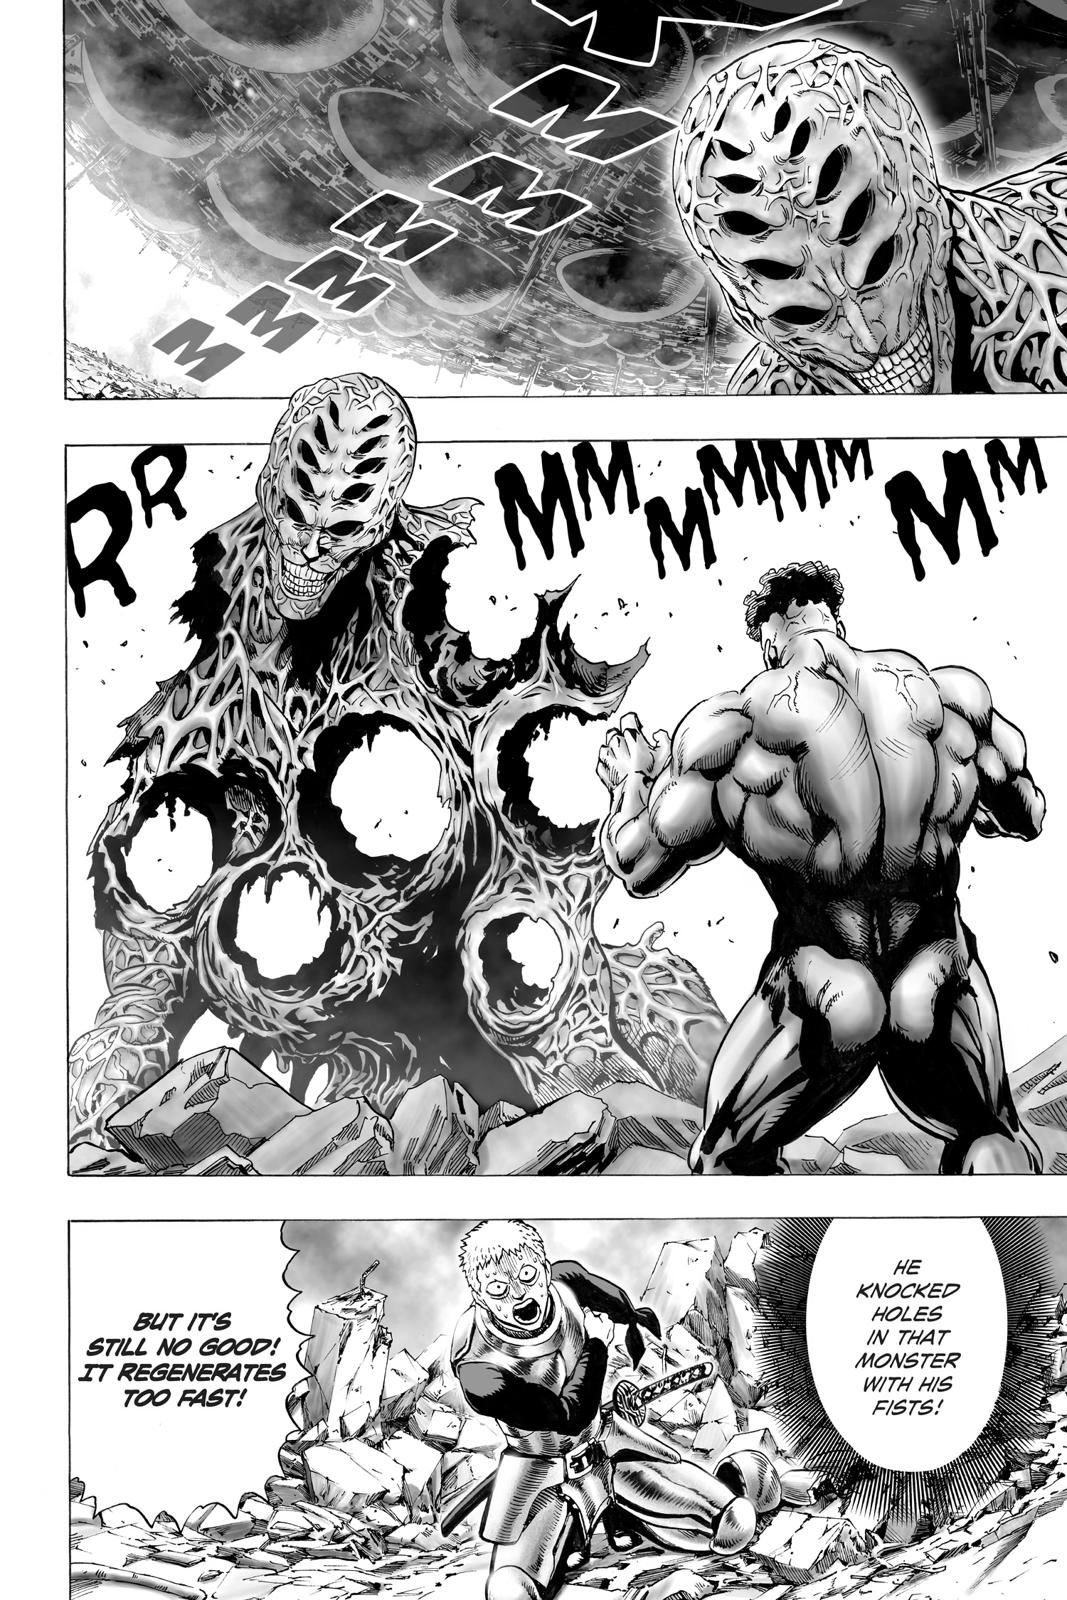 One-Punch Man, Punch 32 image 51